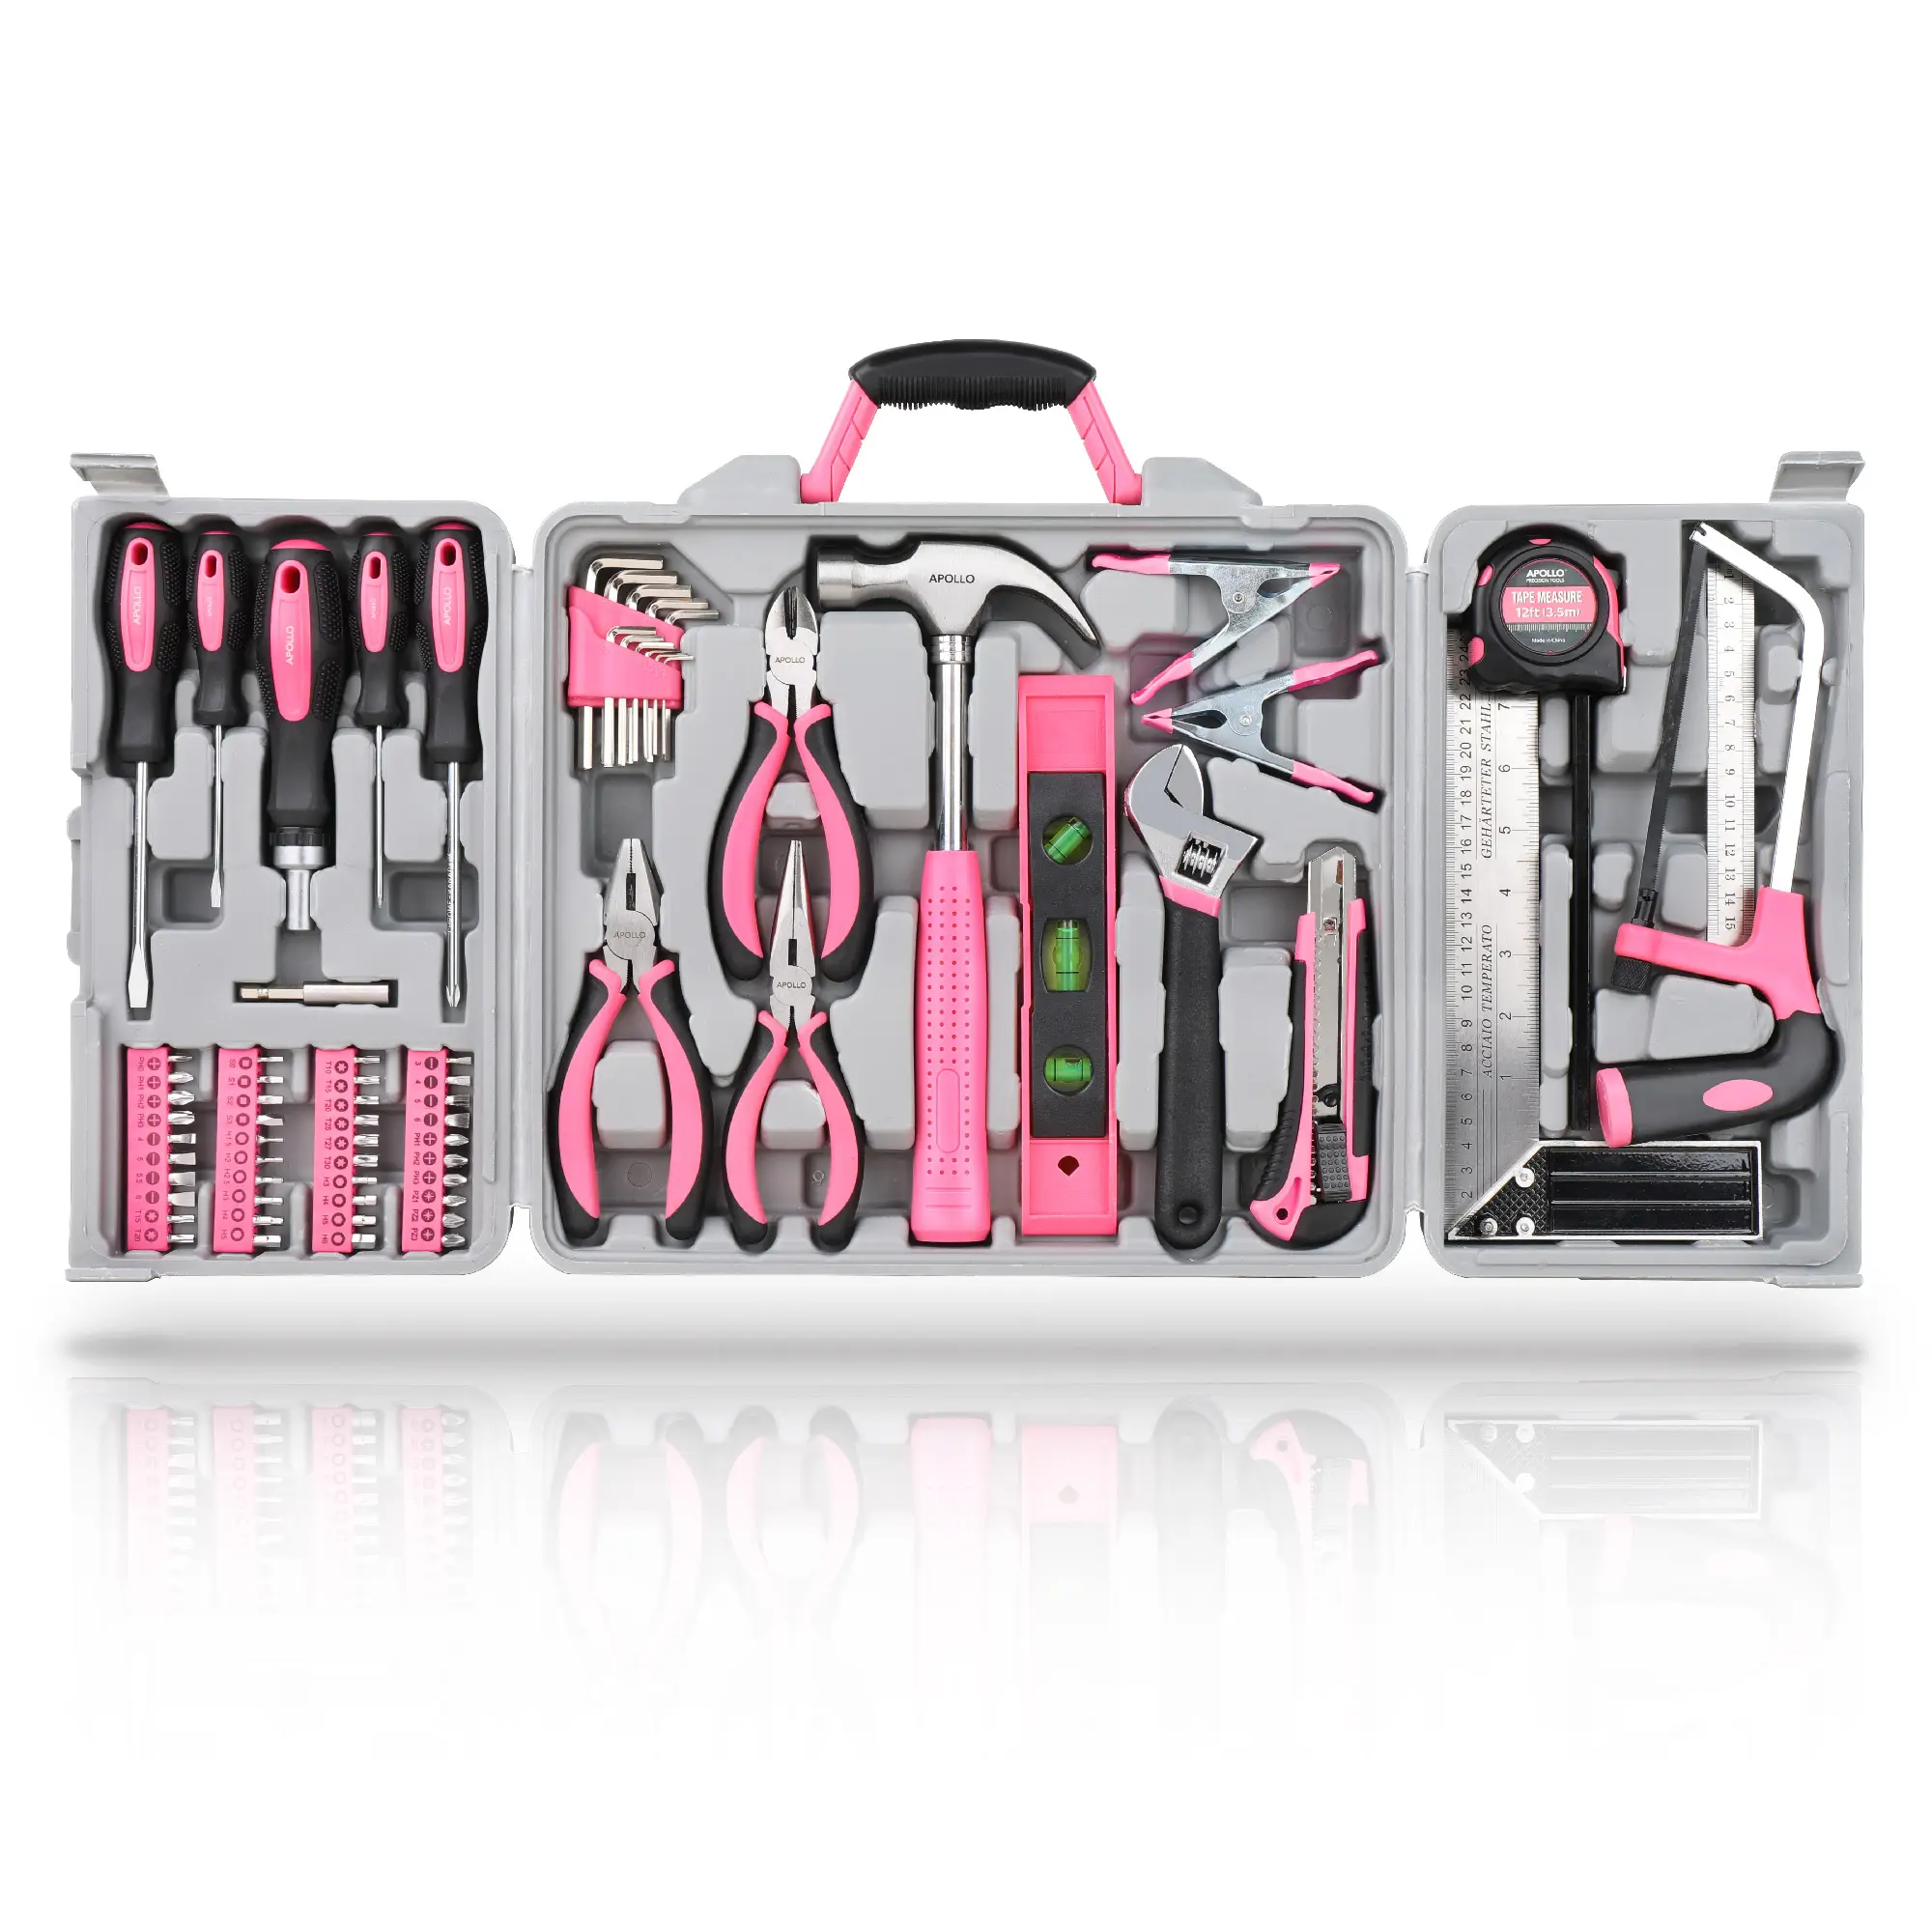 71pc Women Ladies Pink Home   Office DIY Hand Tool Kit Set for Complete Household Repairs in a Portable Tool Box Case